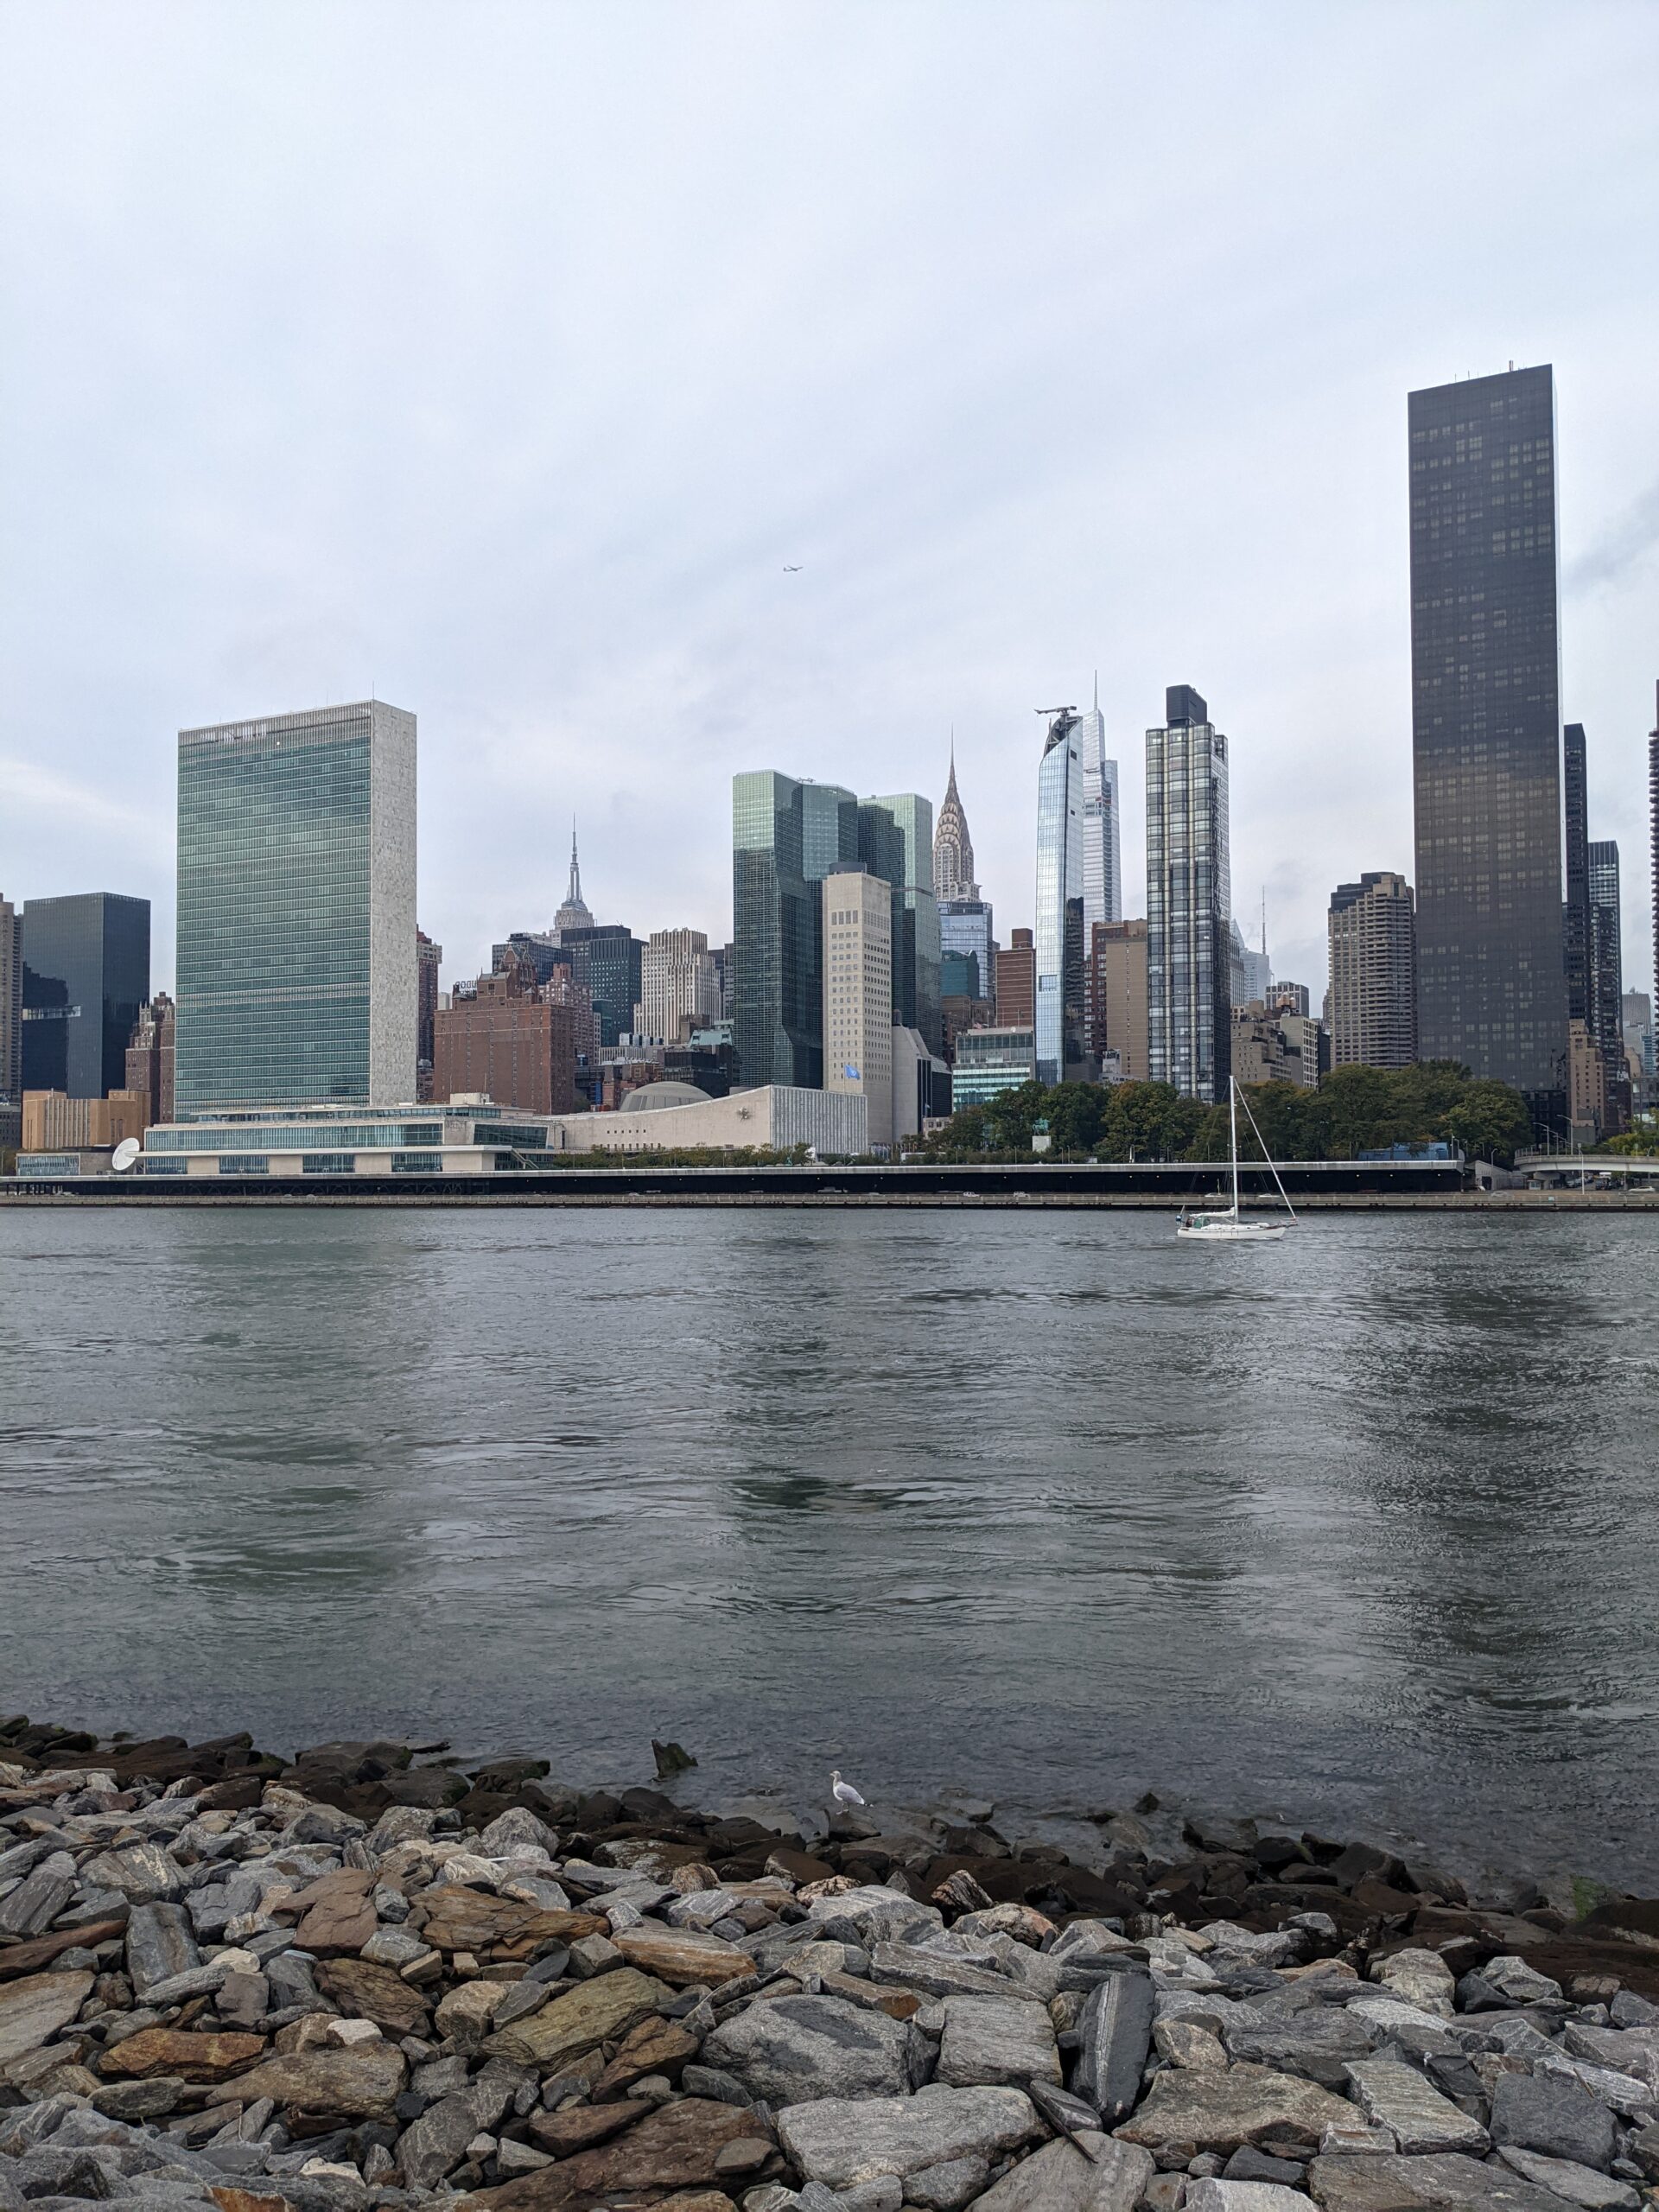 United Nations Head Quarters as seen from Roosevelt Island